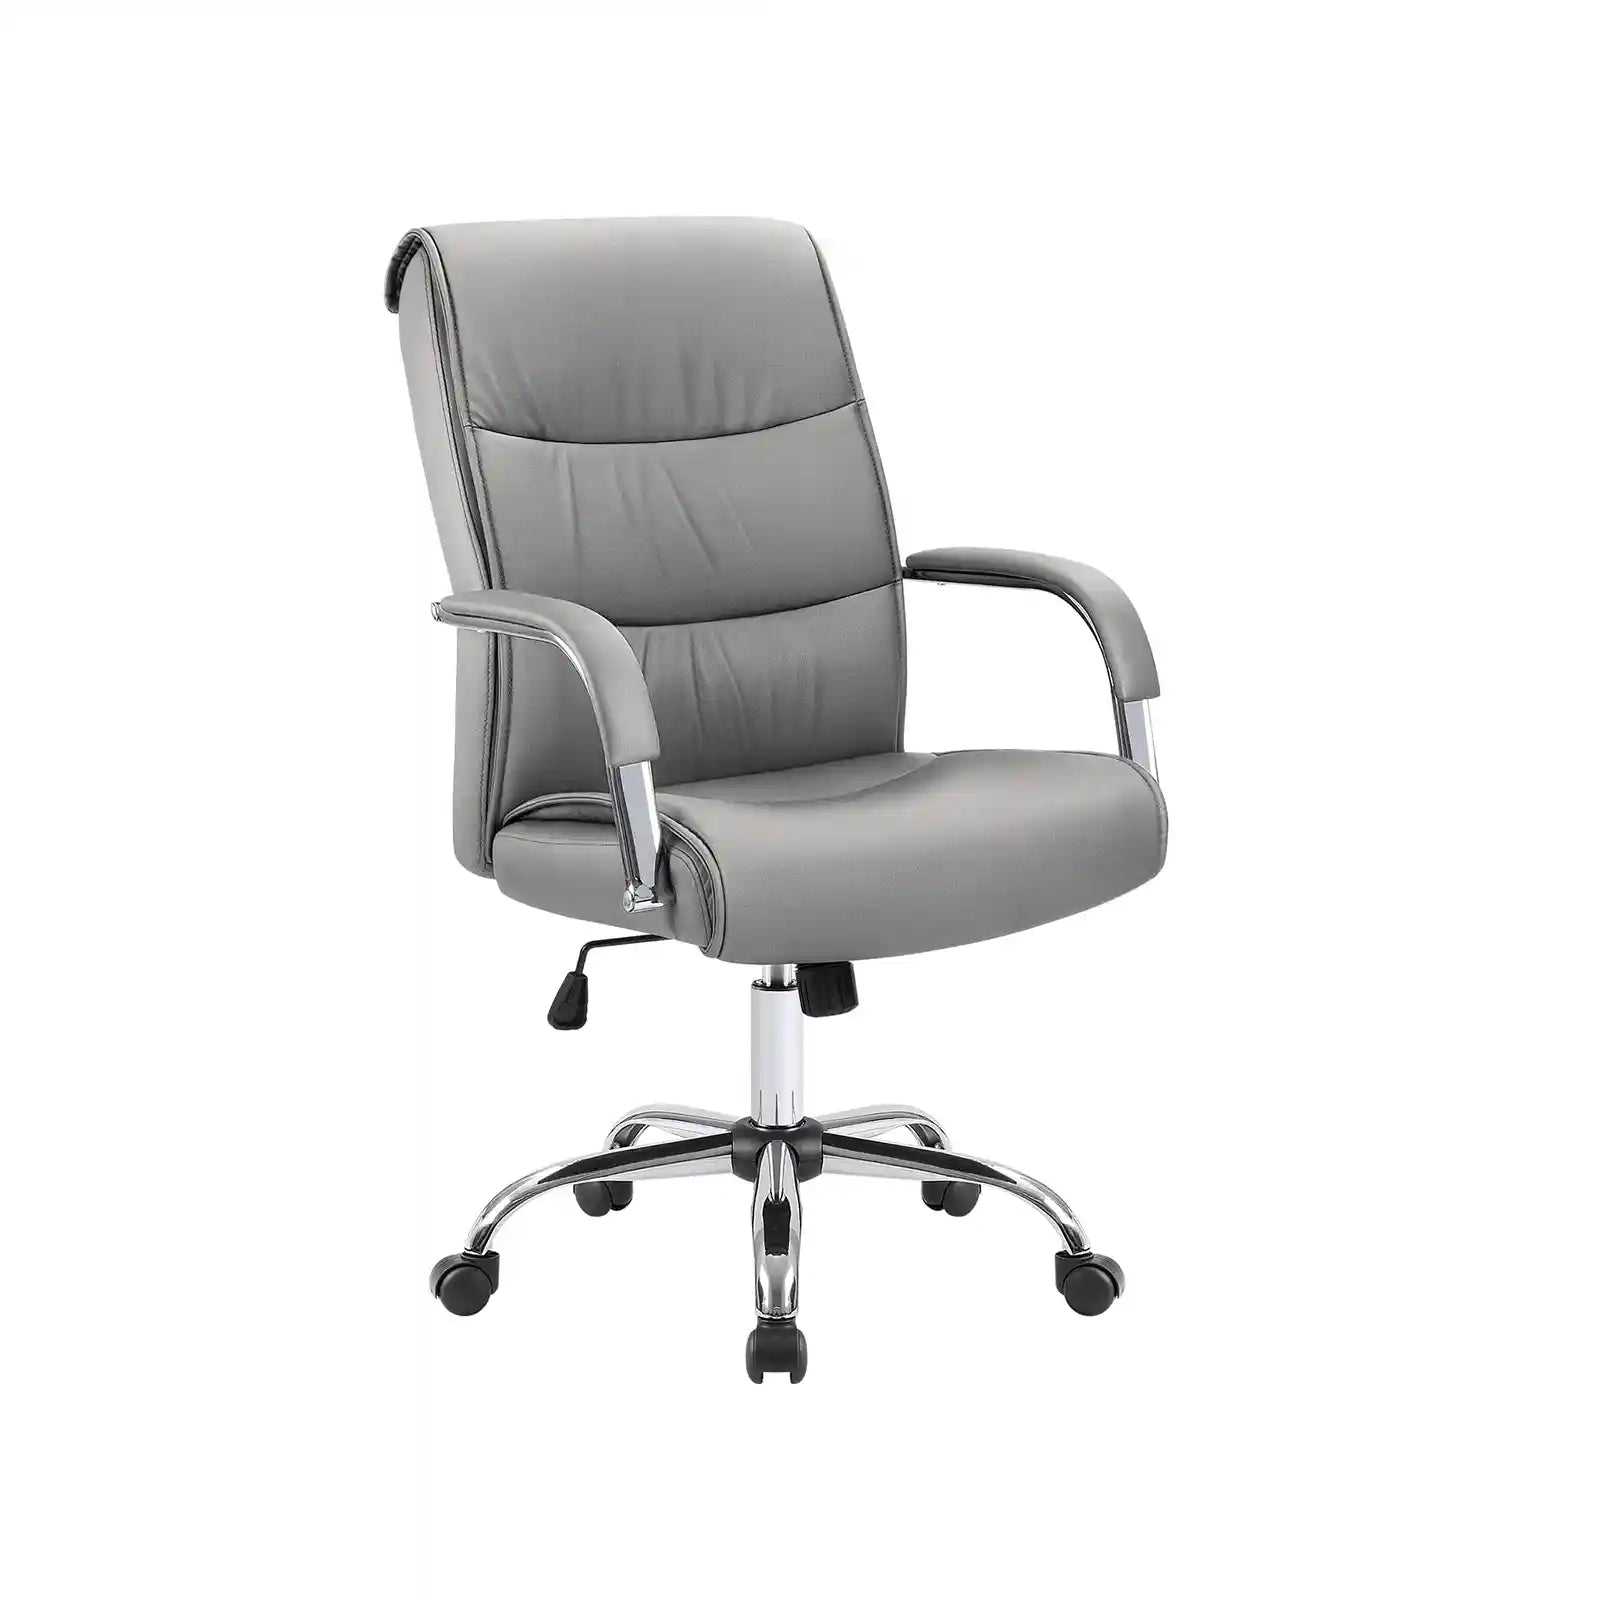 Faux Leather High-Back Executive Ergonomic Office Desk Chair